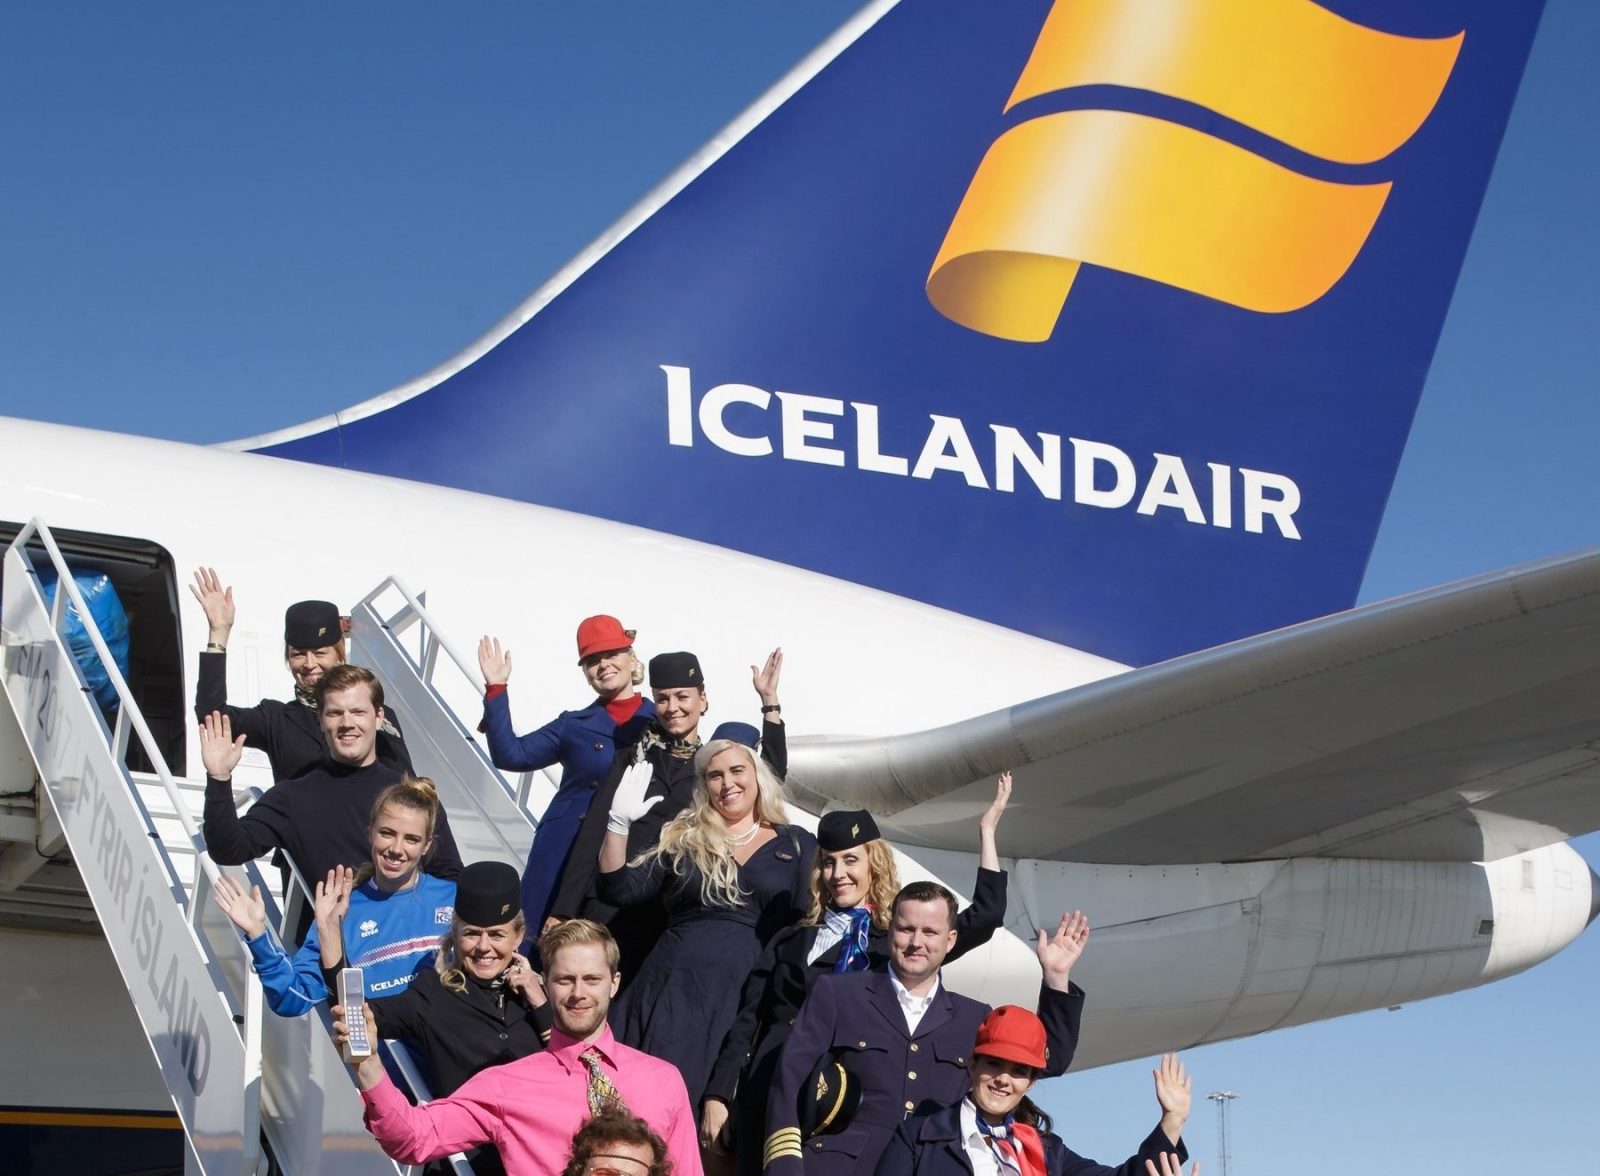 A New Type of In Flight Entertainment: 'Immersive Theatre' - Courtesy of Icelandair